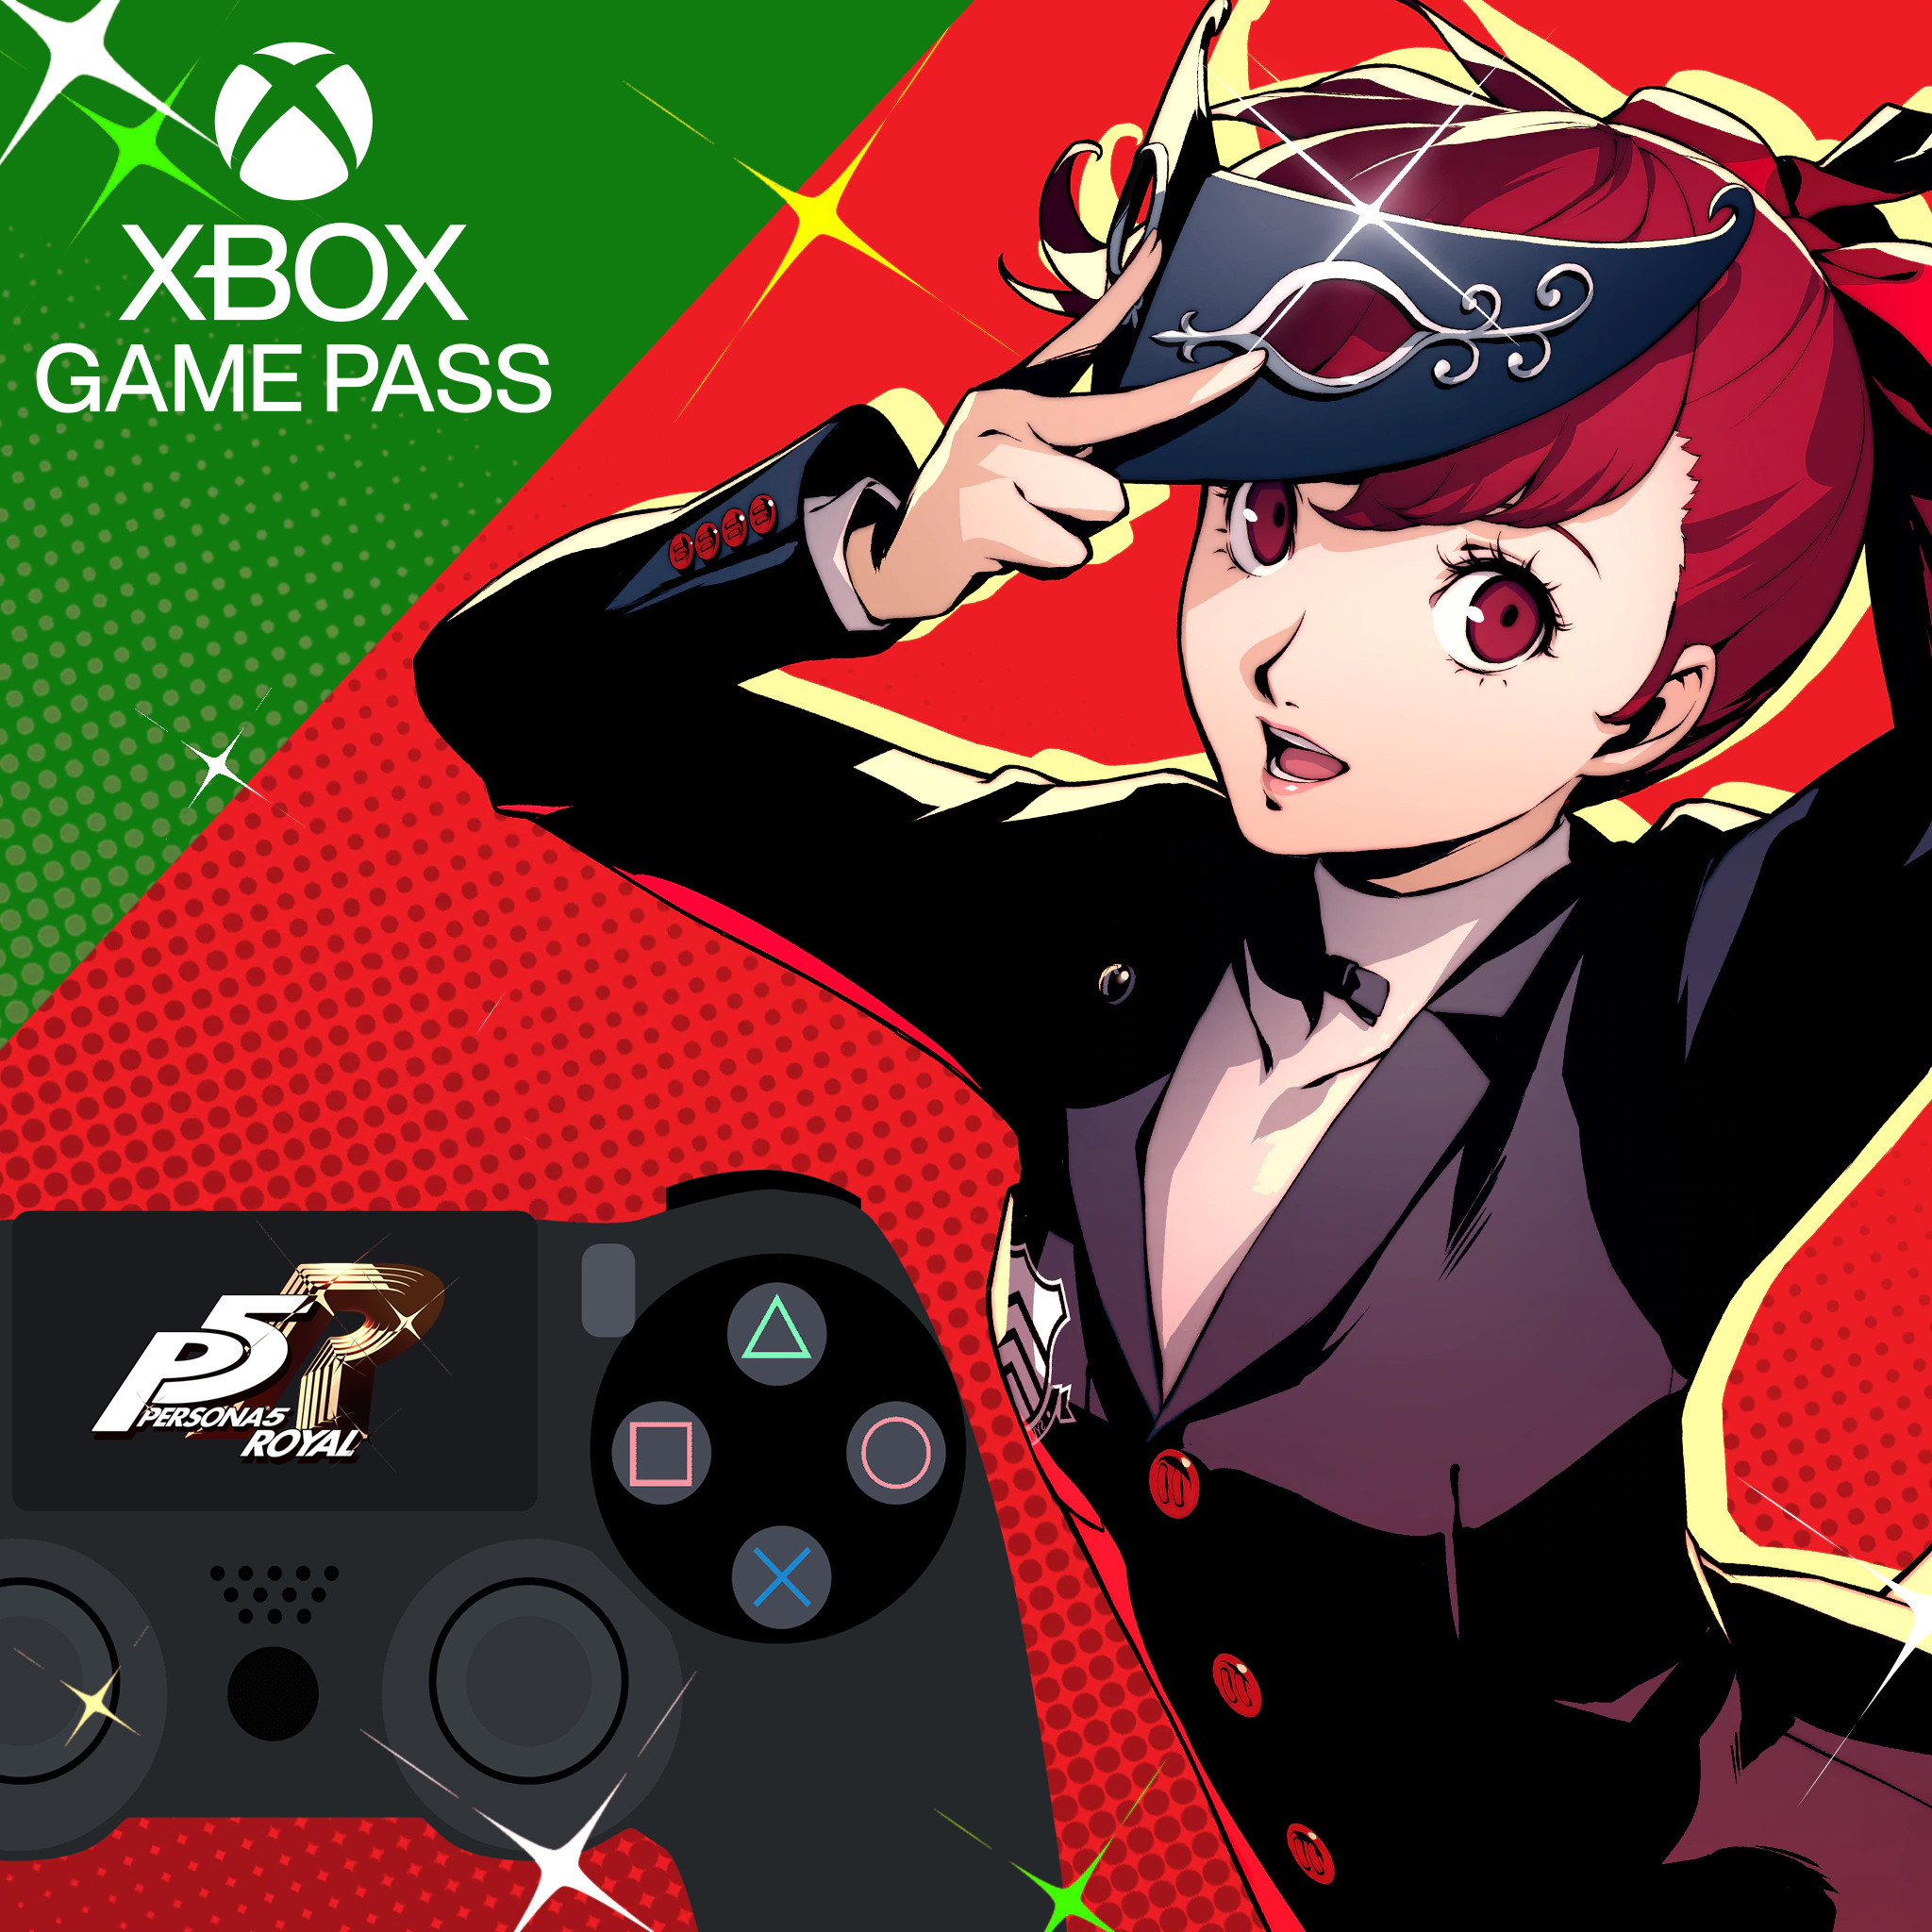 Persona 5 Royal now available for Windows, Xbox and with Game Pass